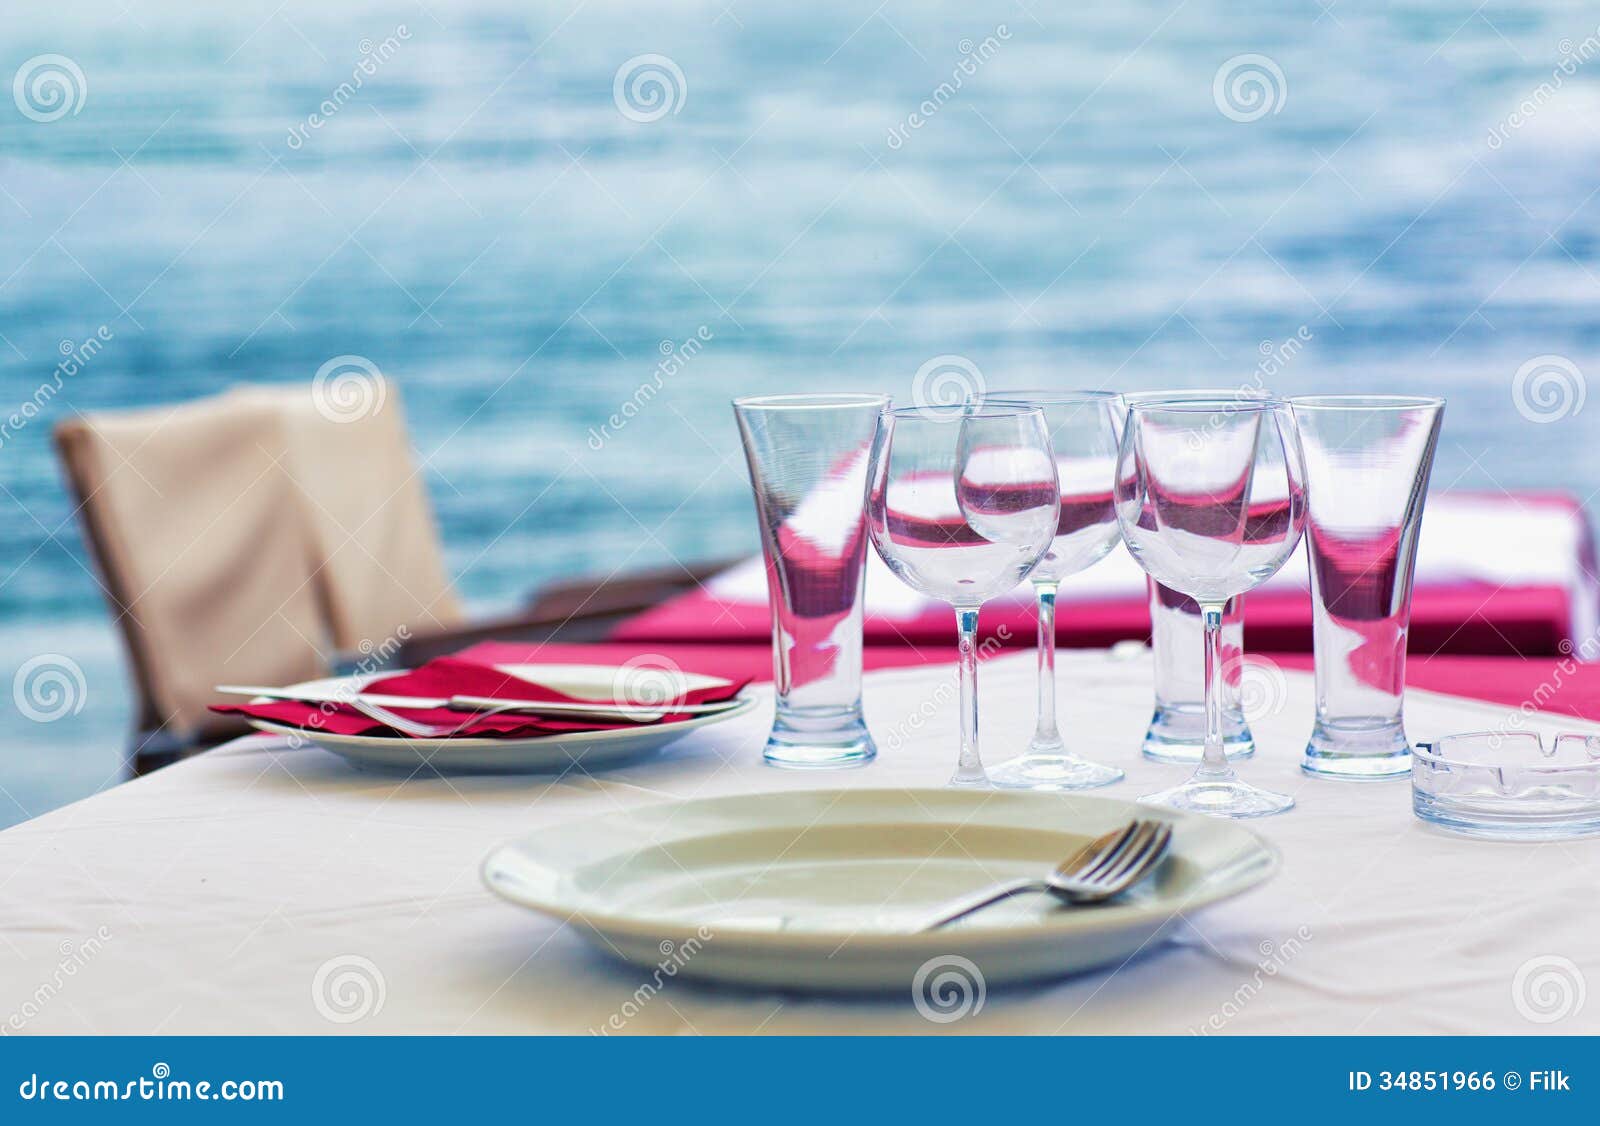 Table at the outdoor sea restaurant, with water on the background